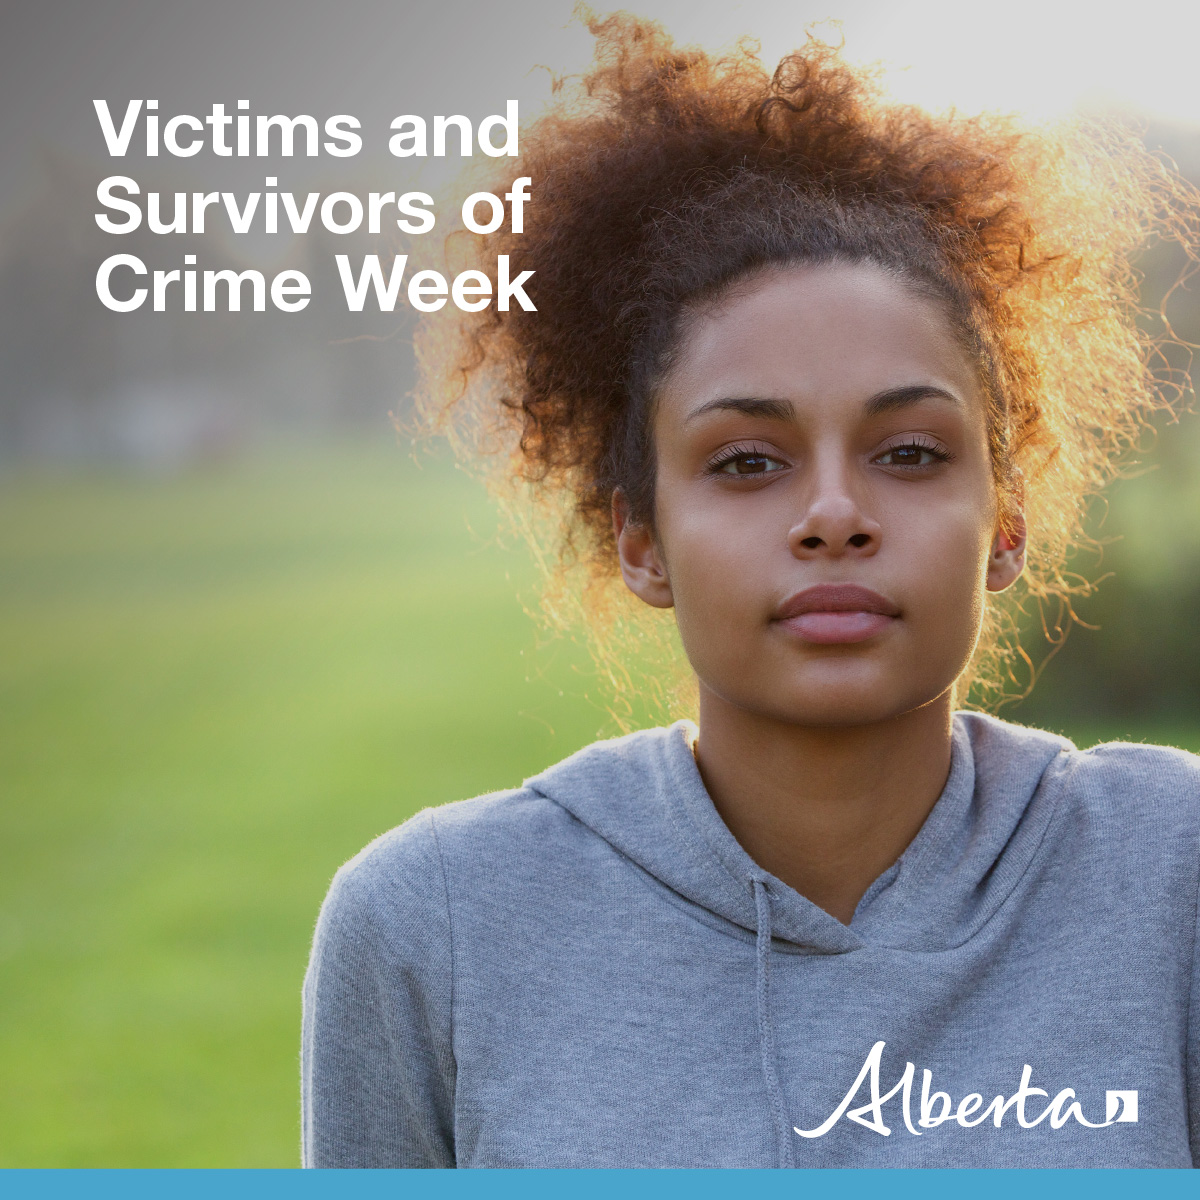 May 12-18 is Victims and Survivors of Crime Week. It is important to listen to the stories of individuals affected by crime and help them in the healing process. Alberta’s government is committed to providing services that help support victims and their families. #AlbertaCulture